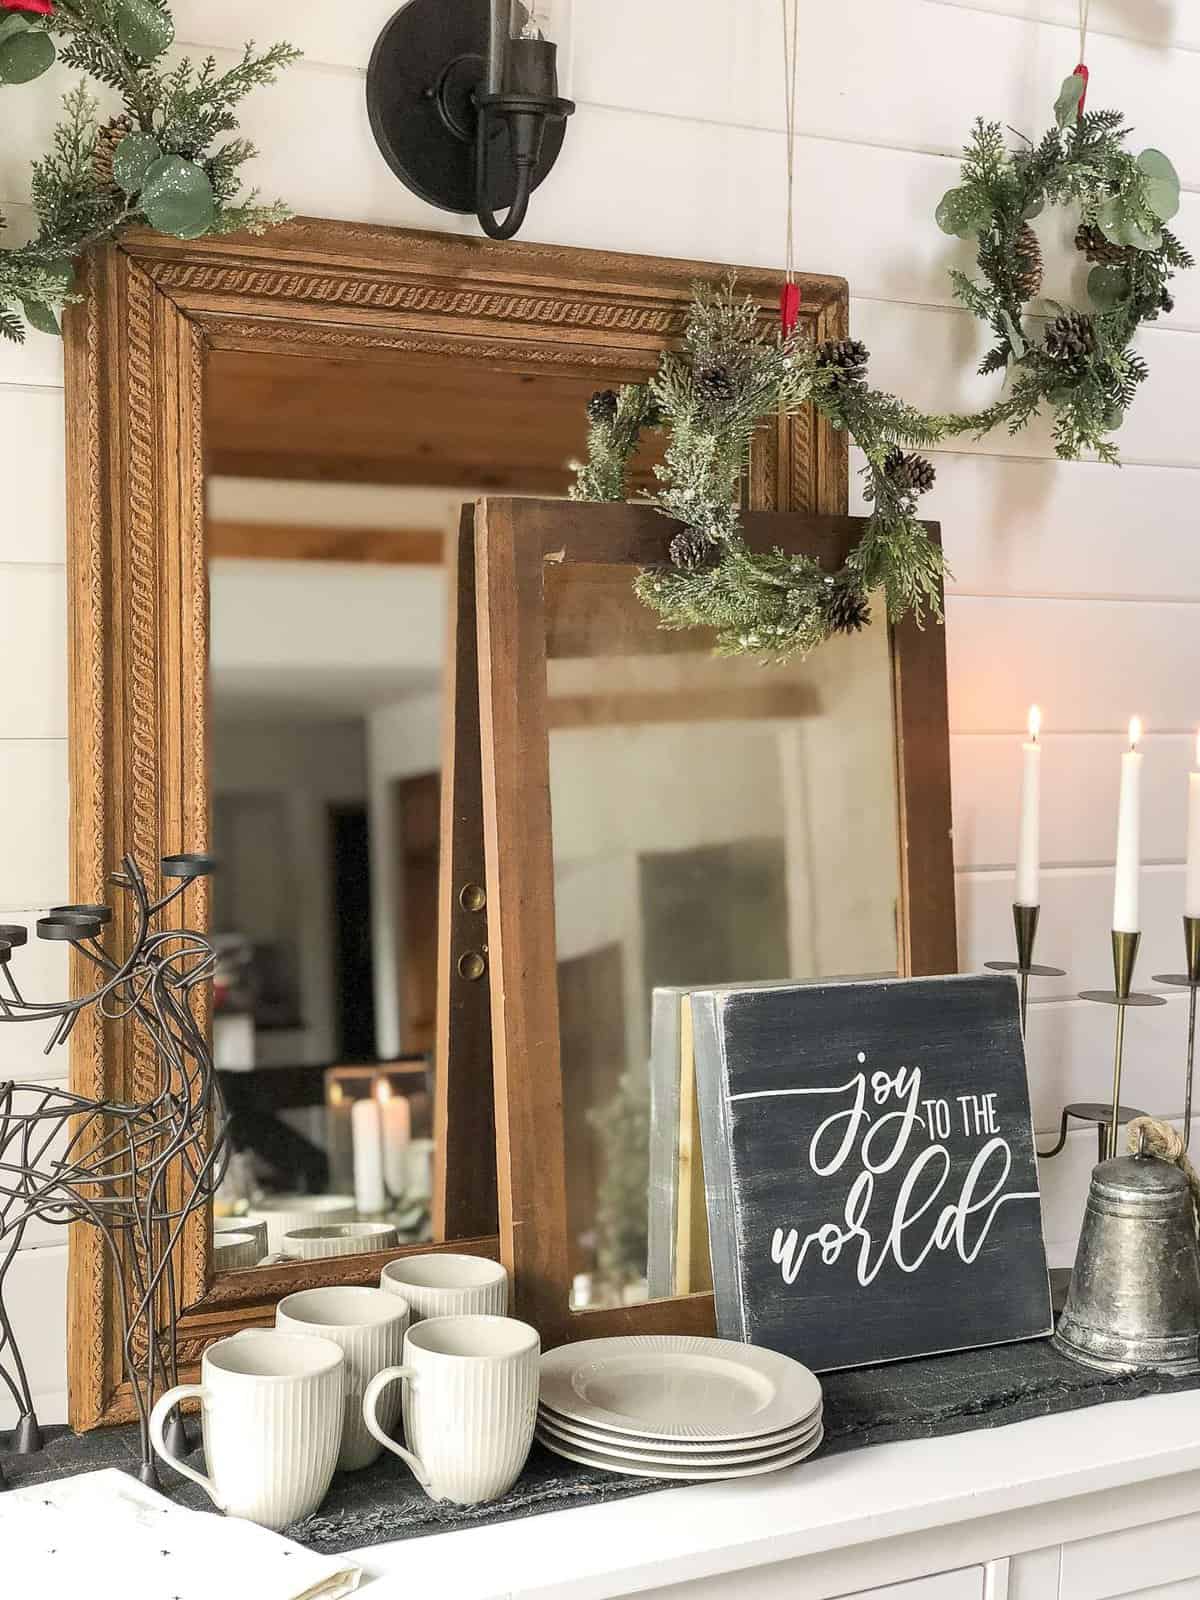 Are you planning a holiday get together? No need to buy Christmas dishes! Here are a few tips on how to use everyday dishes for your holiday table decor. #holidaytabledecor #christmasdecor